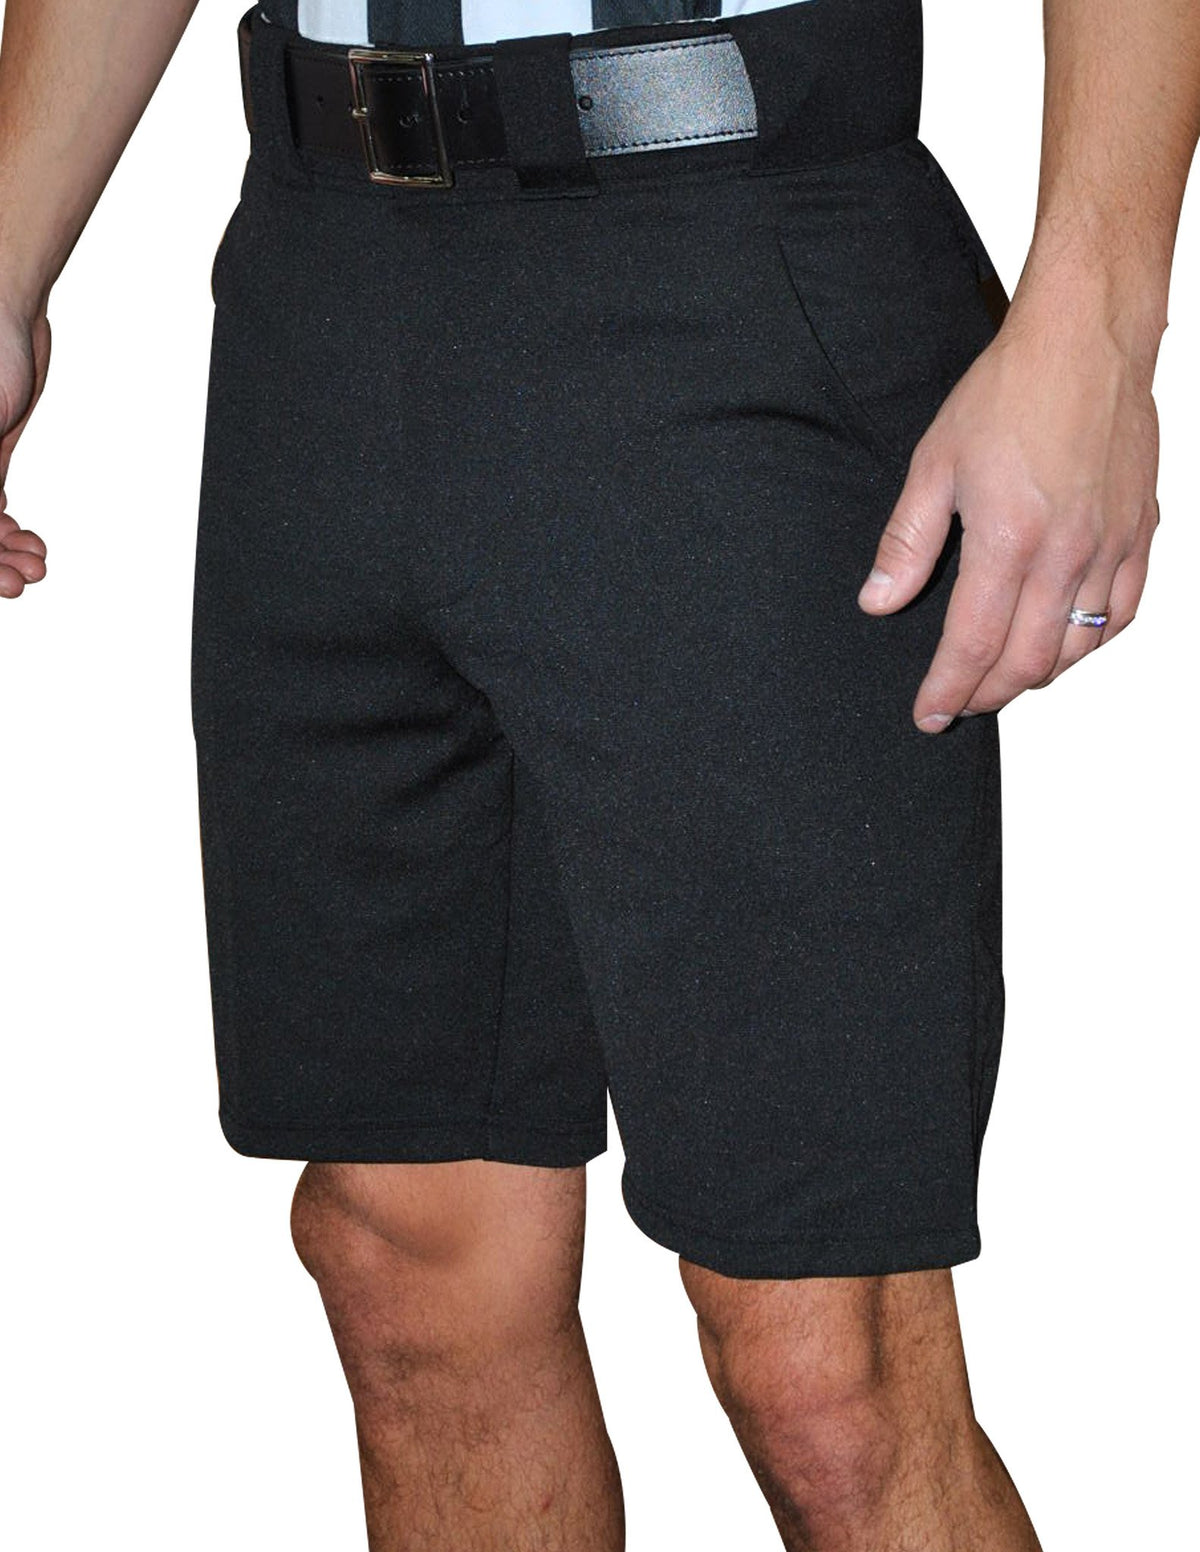 Smitty | FBS-171 | Football & Lacrosse Shorts | Solid Black | Double-knit Polyester